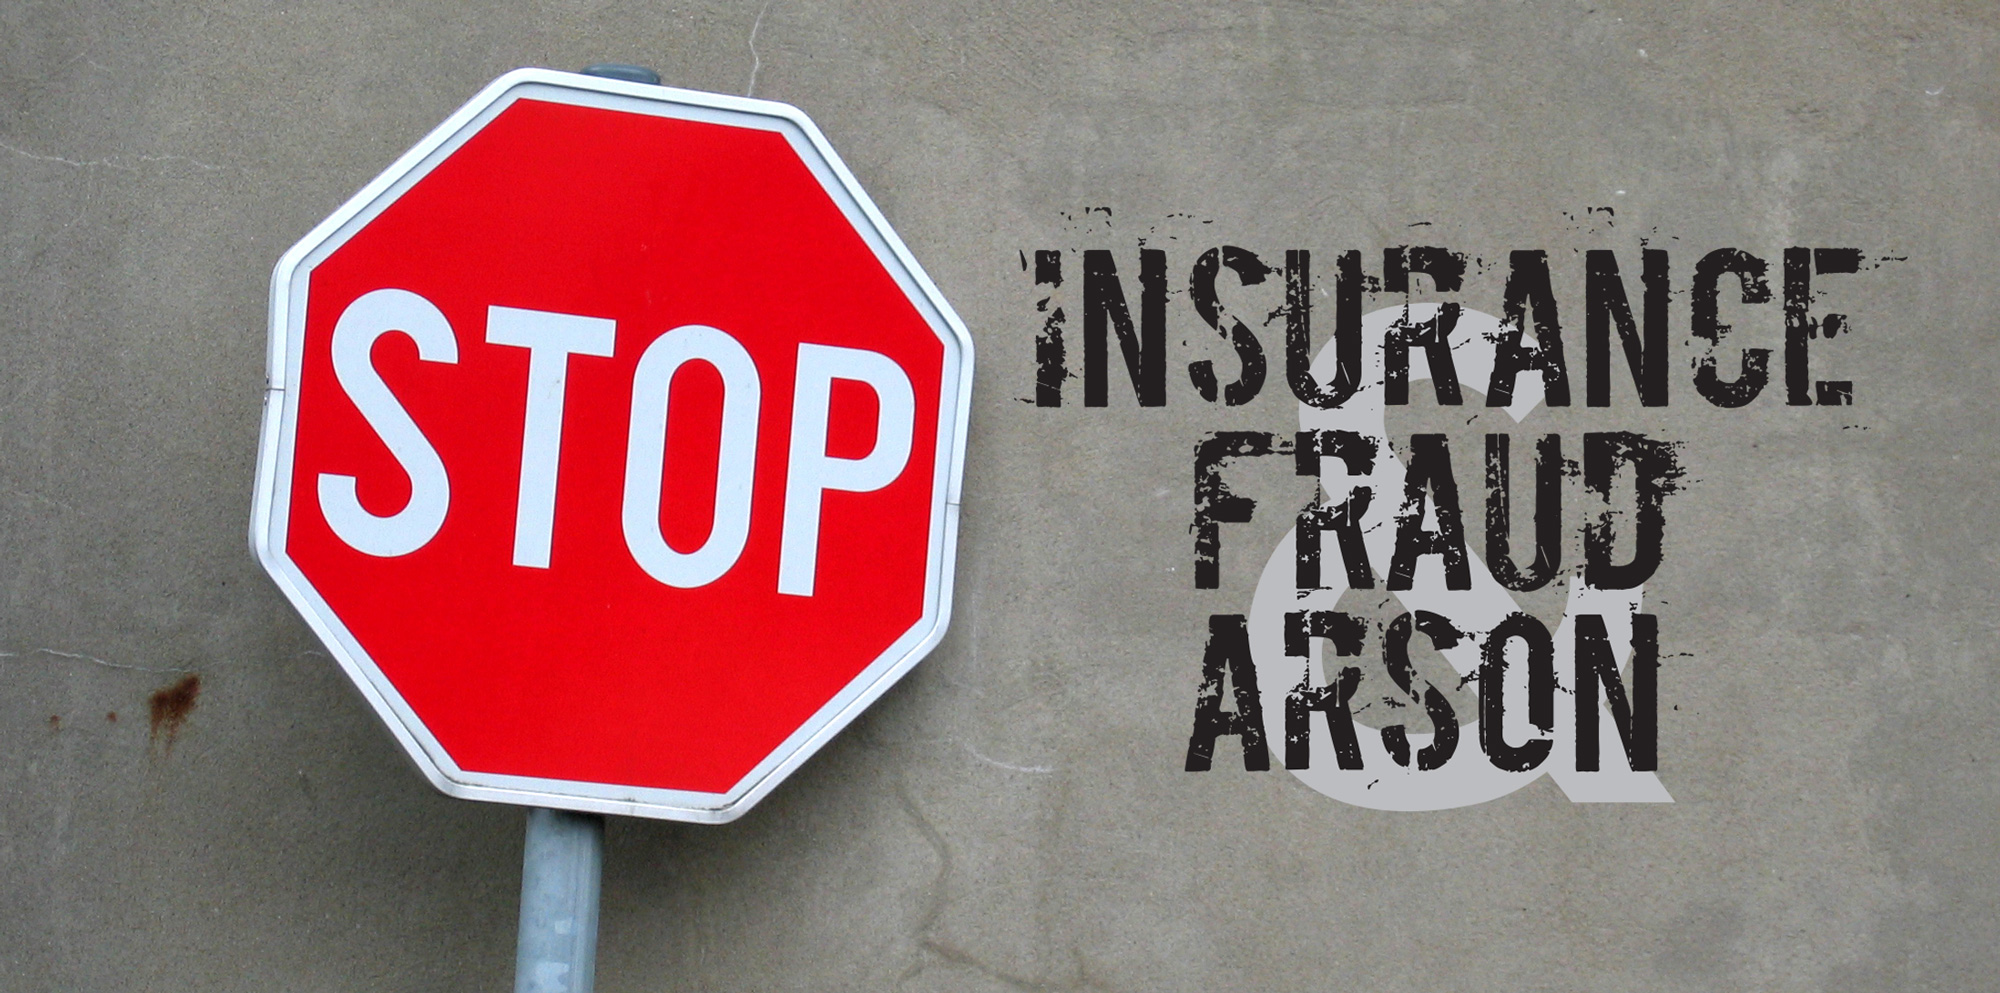 Stop Insurance Fraud and Arson